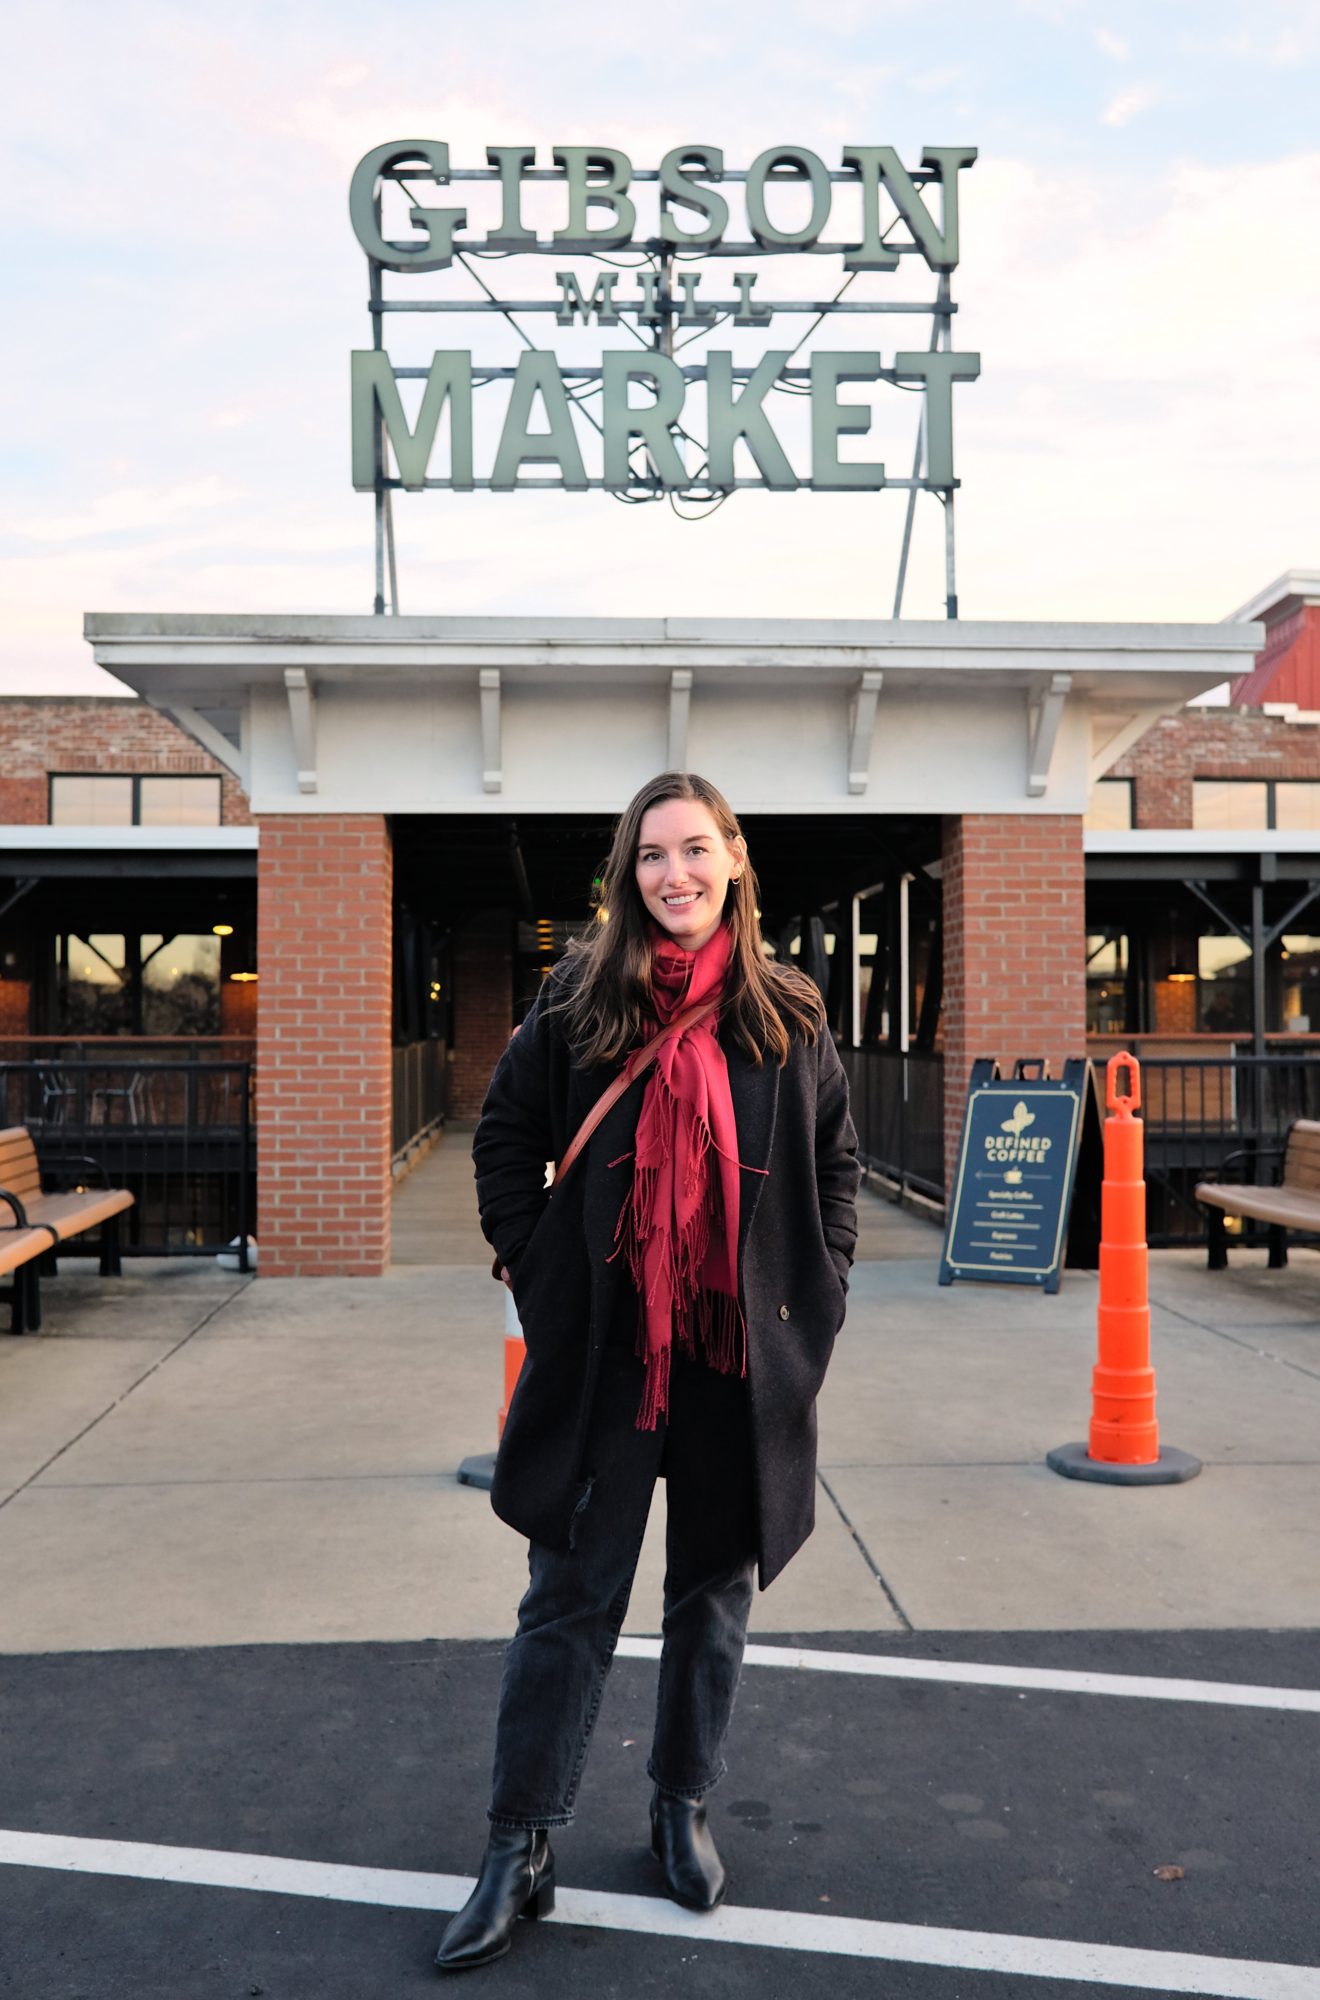 Alyssa stands in front of Gibson Mill Market